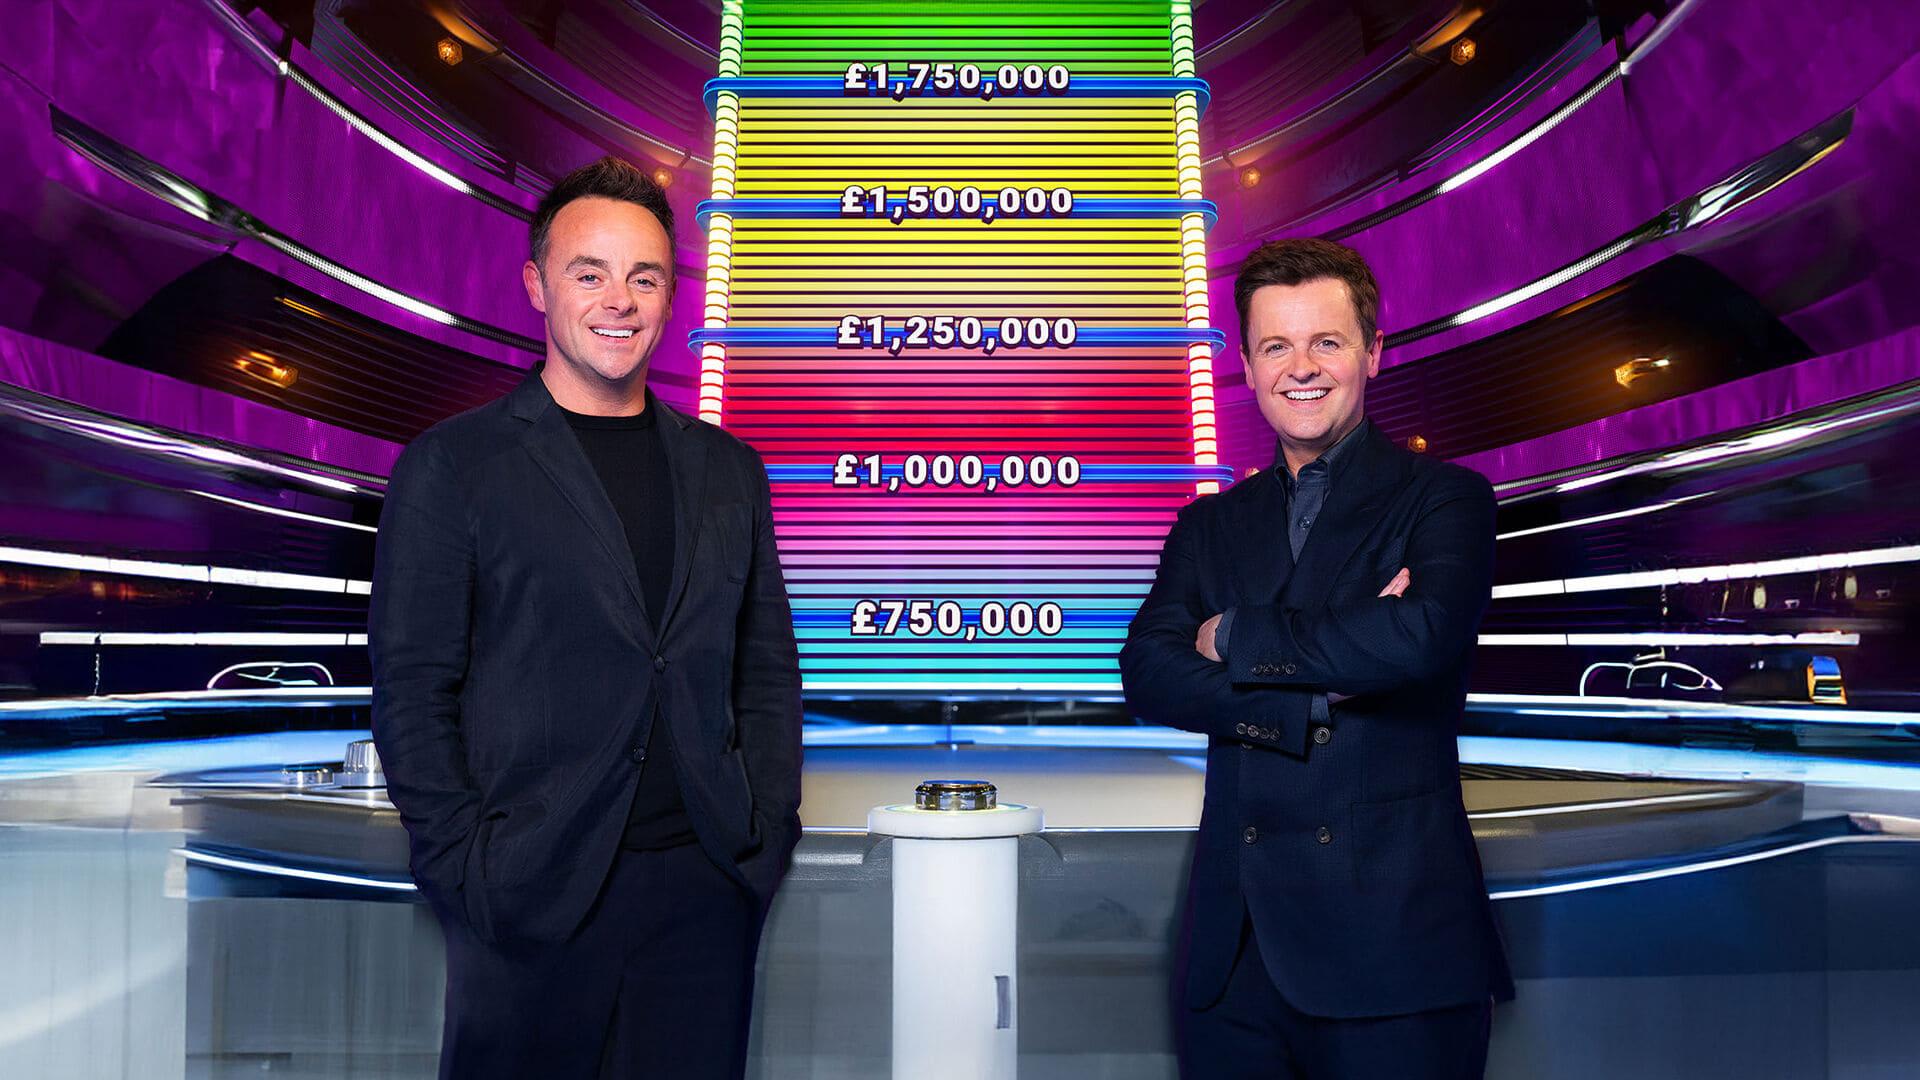 Ant & Dec's Limitless Win backdrop